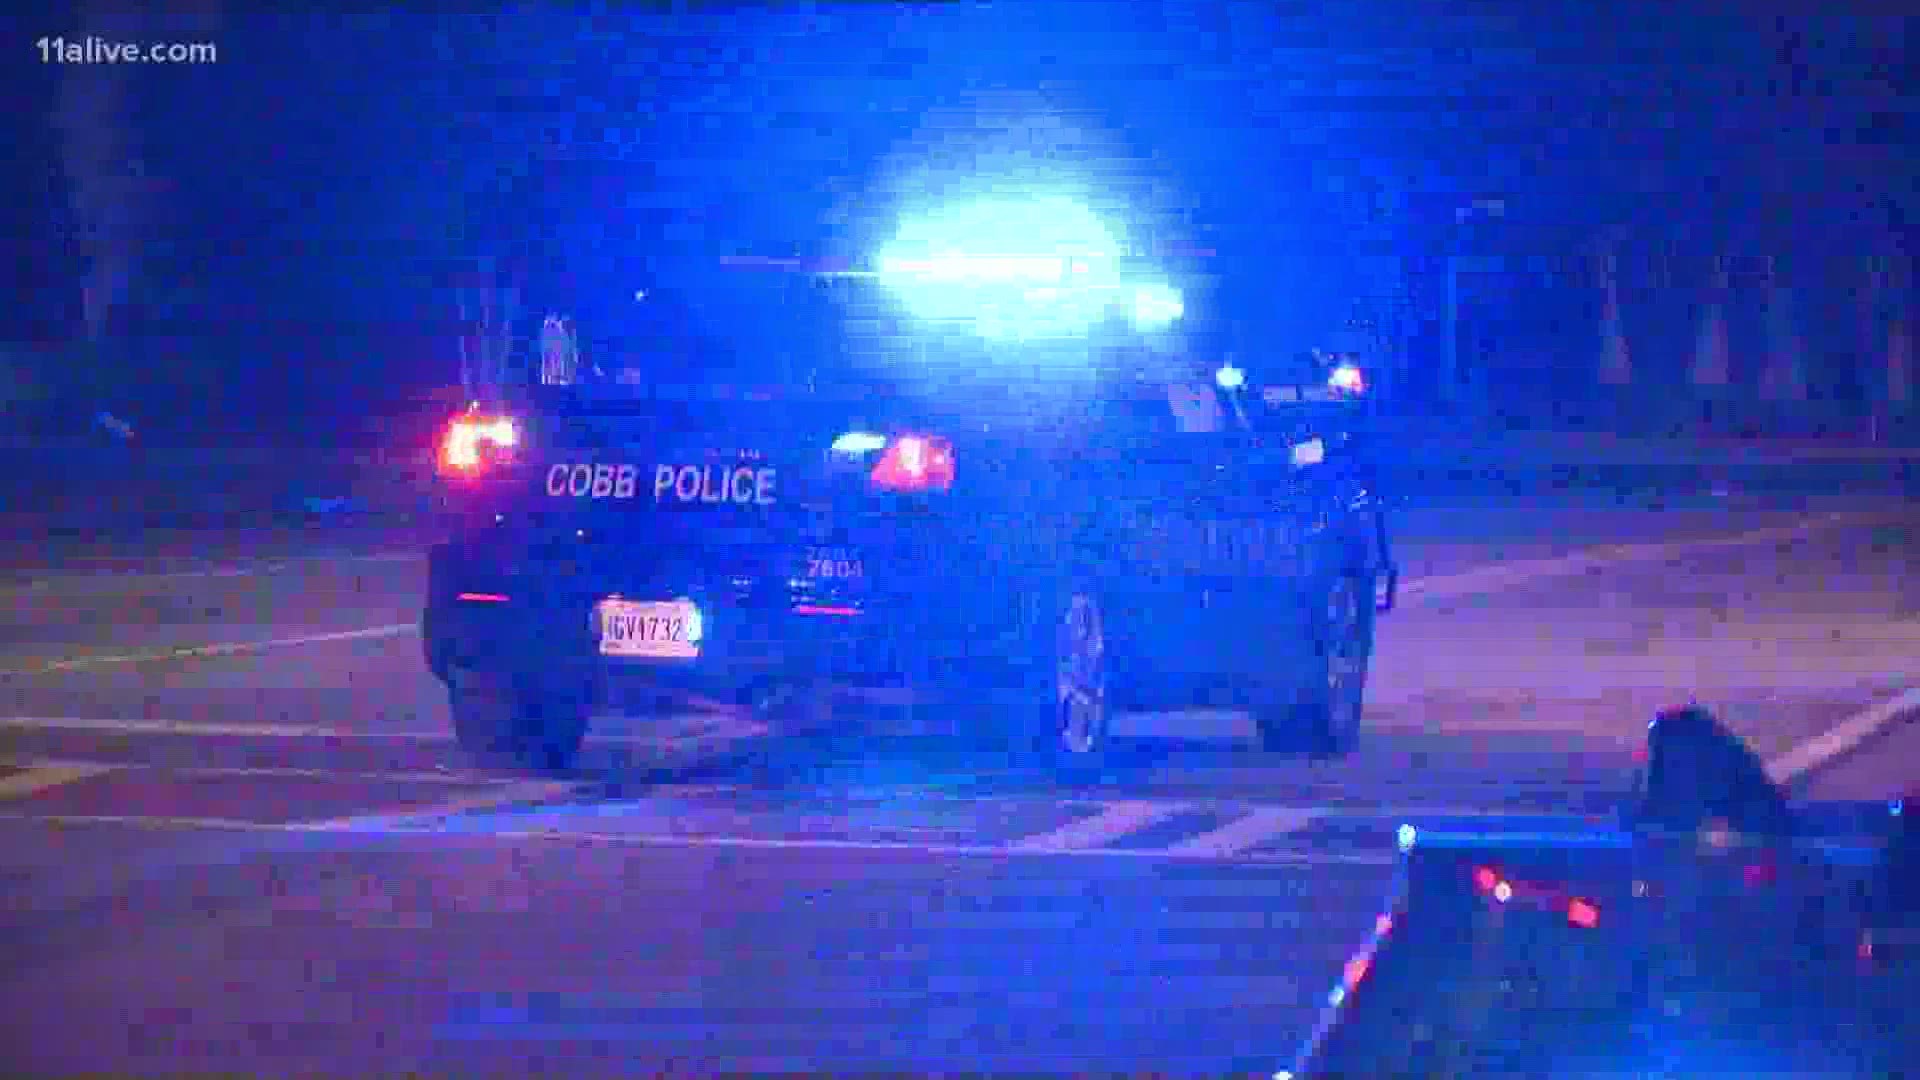 Police say a carjacking suspect fired at officers. During a shootout the suspect was killed.